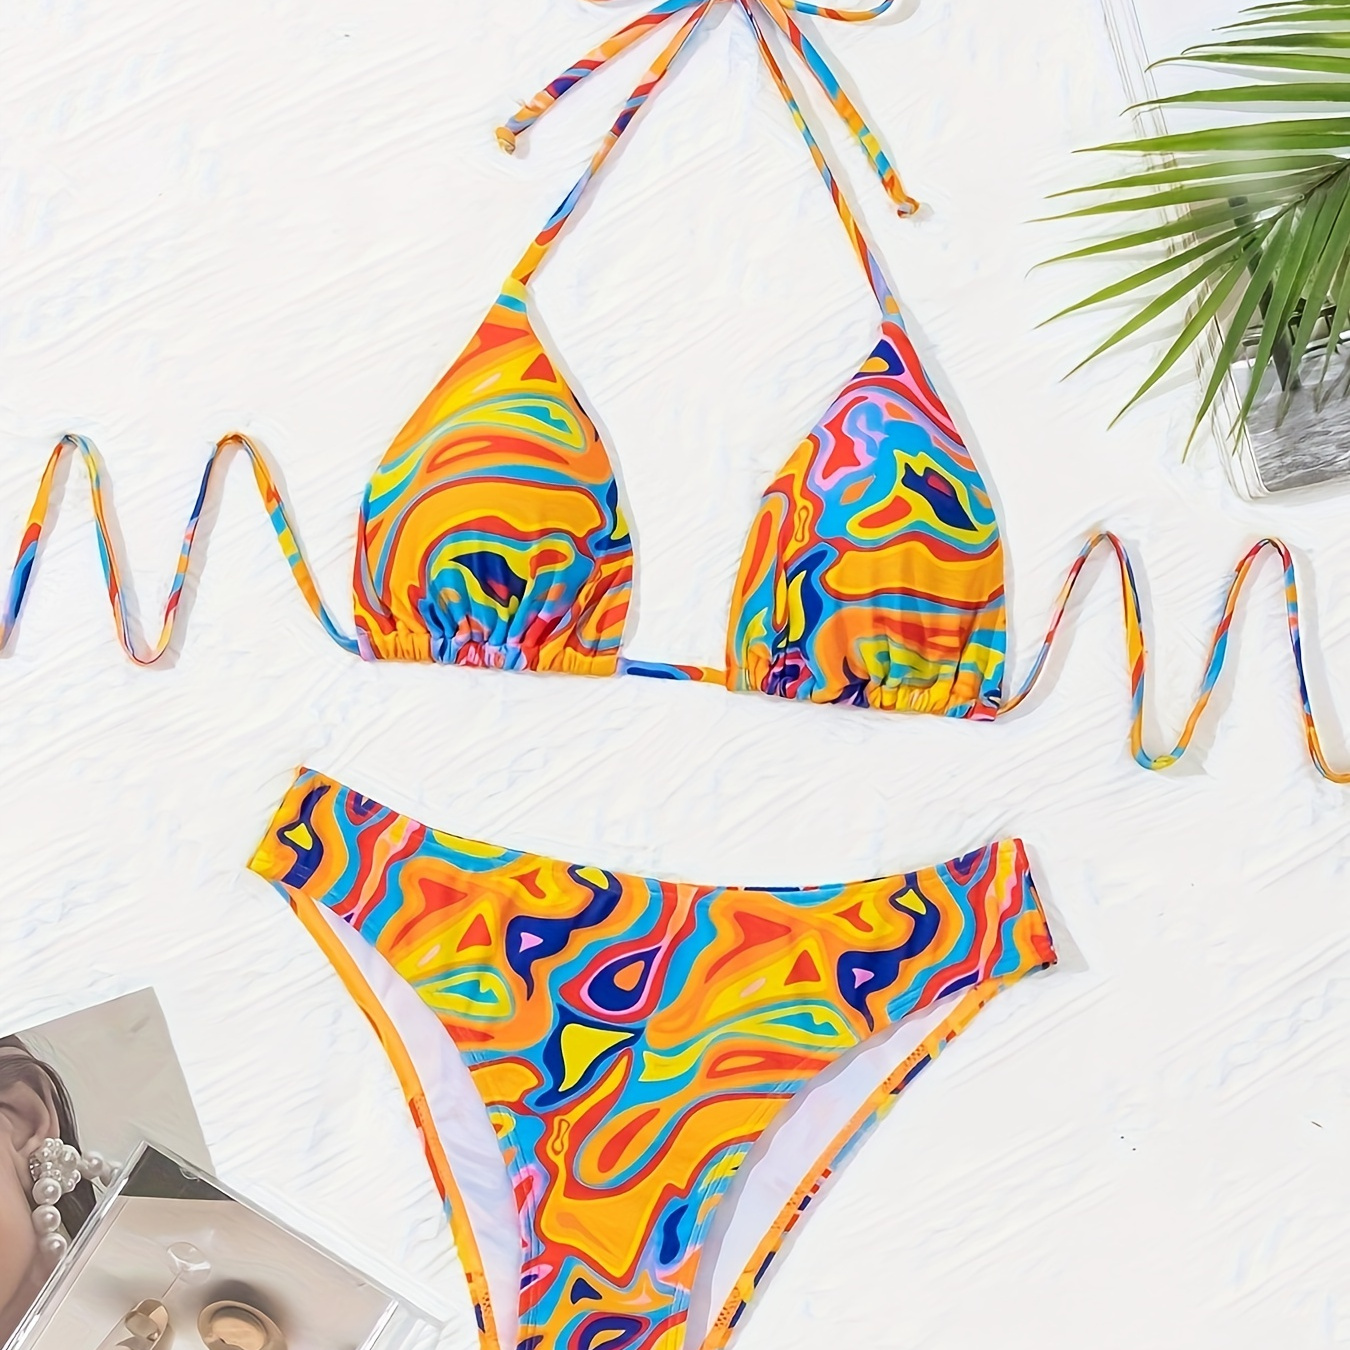 

Multi-color Allover Fluid Print Halter 2 Piece Set Bikini, Triangle Tie Neck Backless Stretchy Swimsuits, Women's Swimwear & Clothing